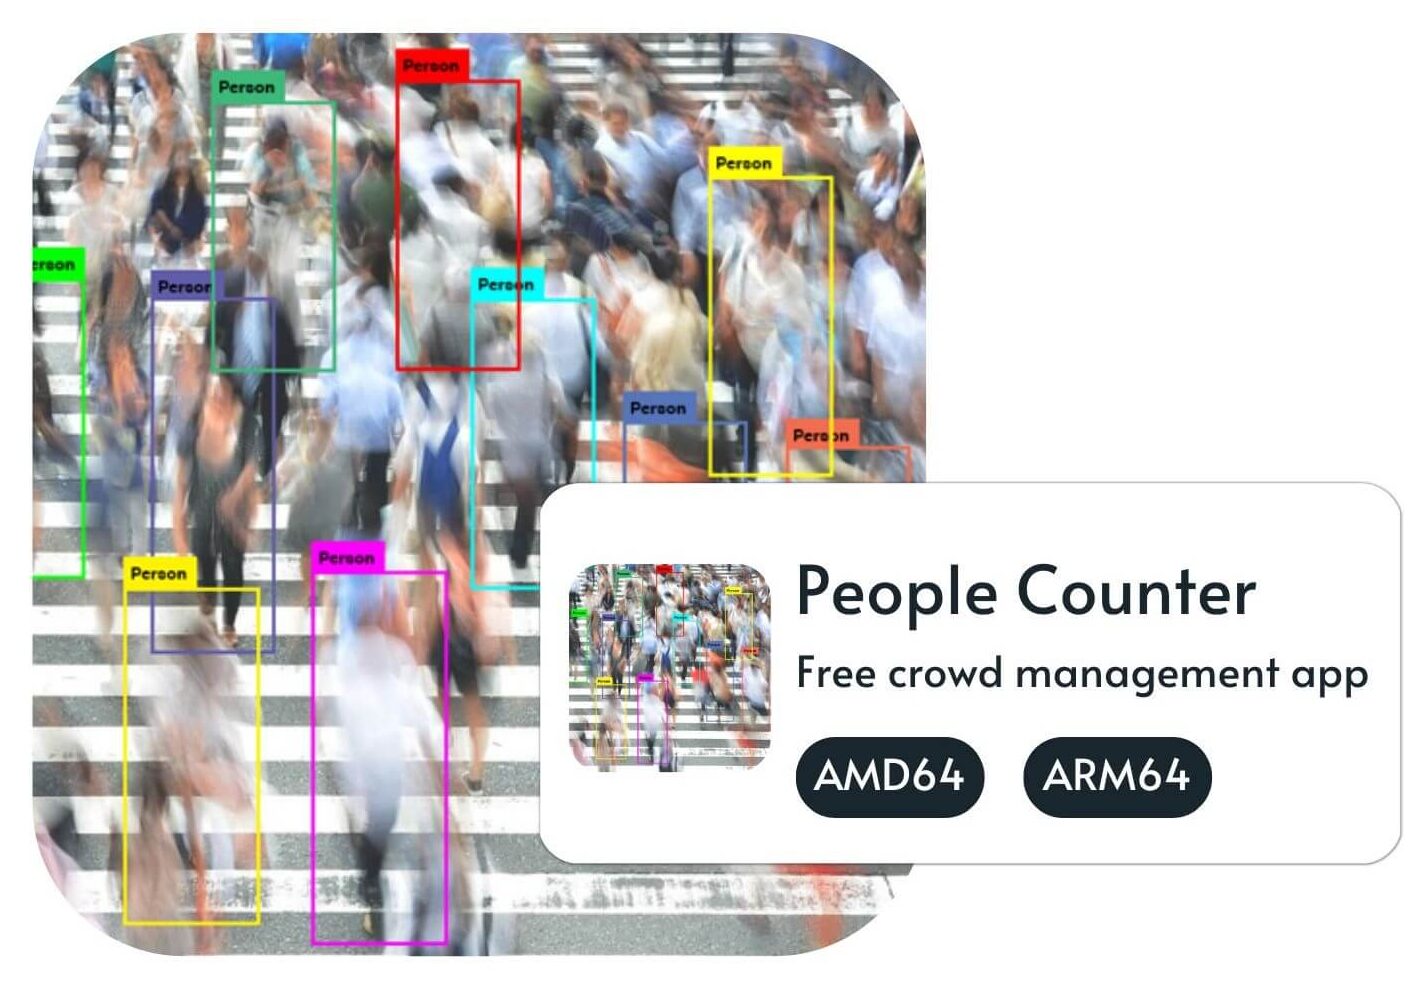 image for people counter app